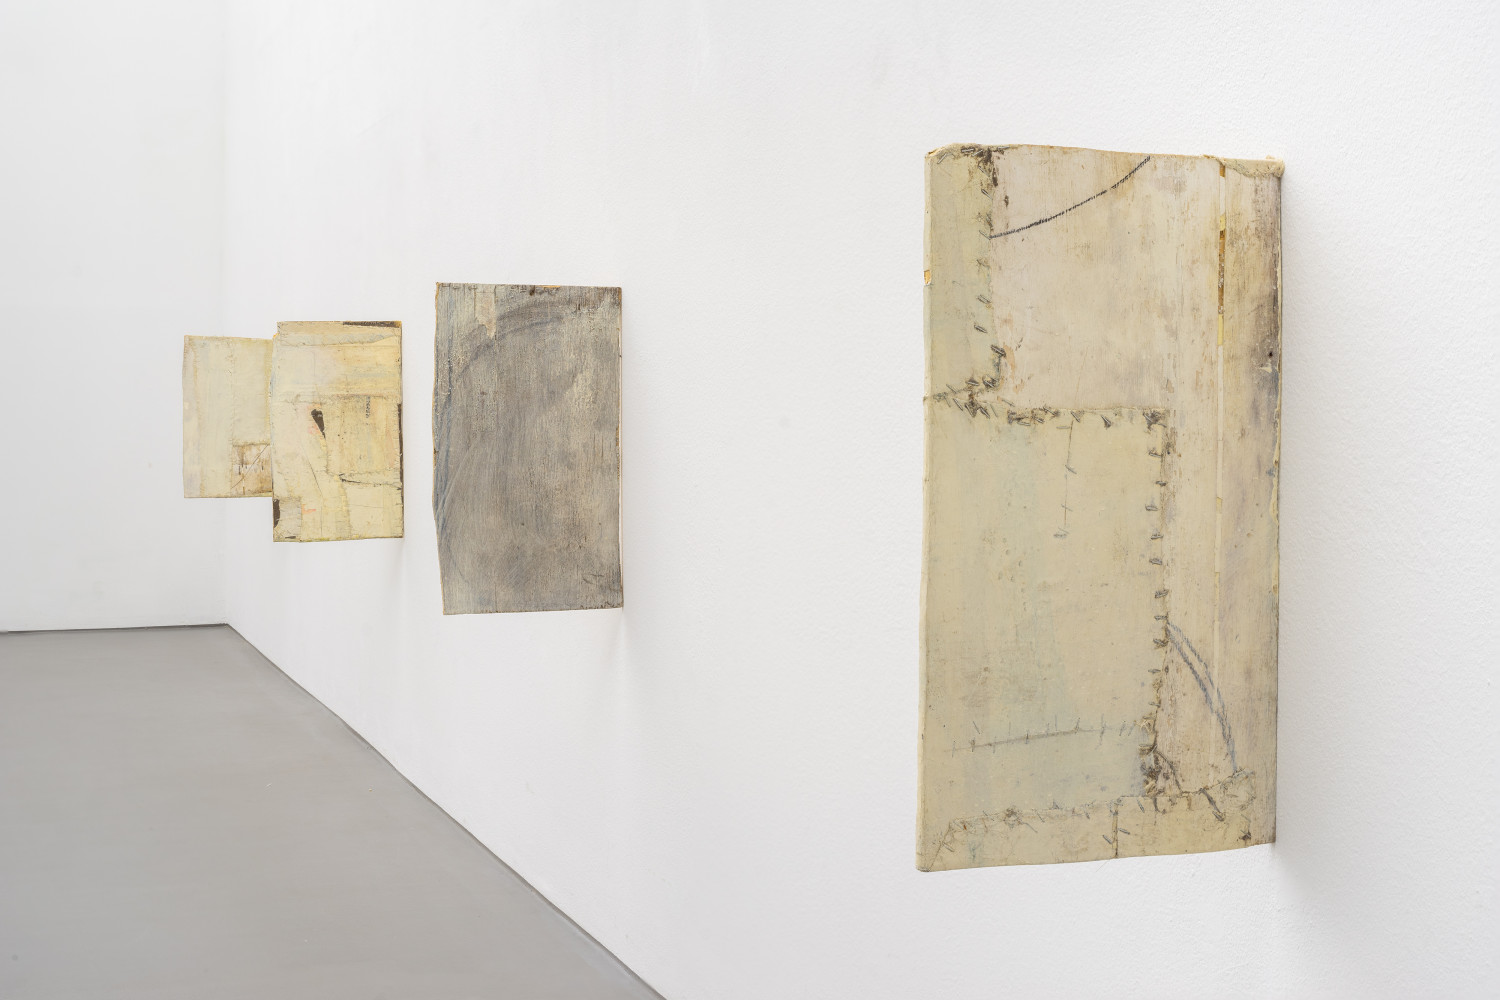 Lawrence Carroll, ‘Page Paintings’, Installation view, Buchmann Galerie